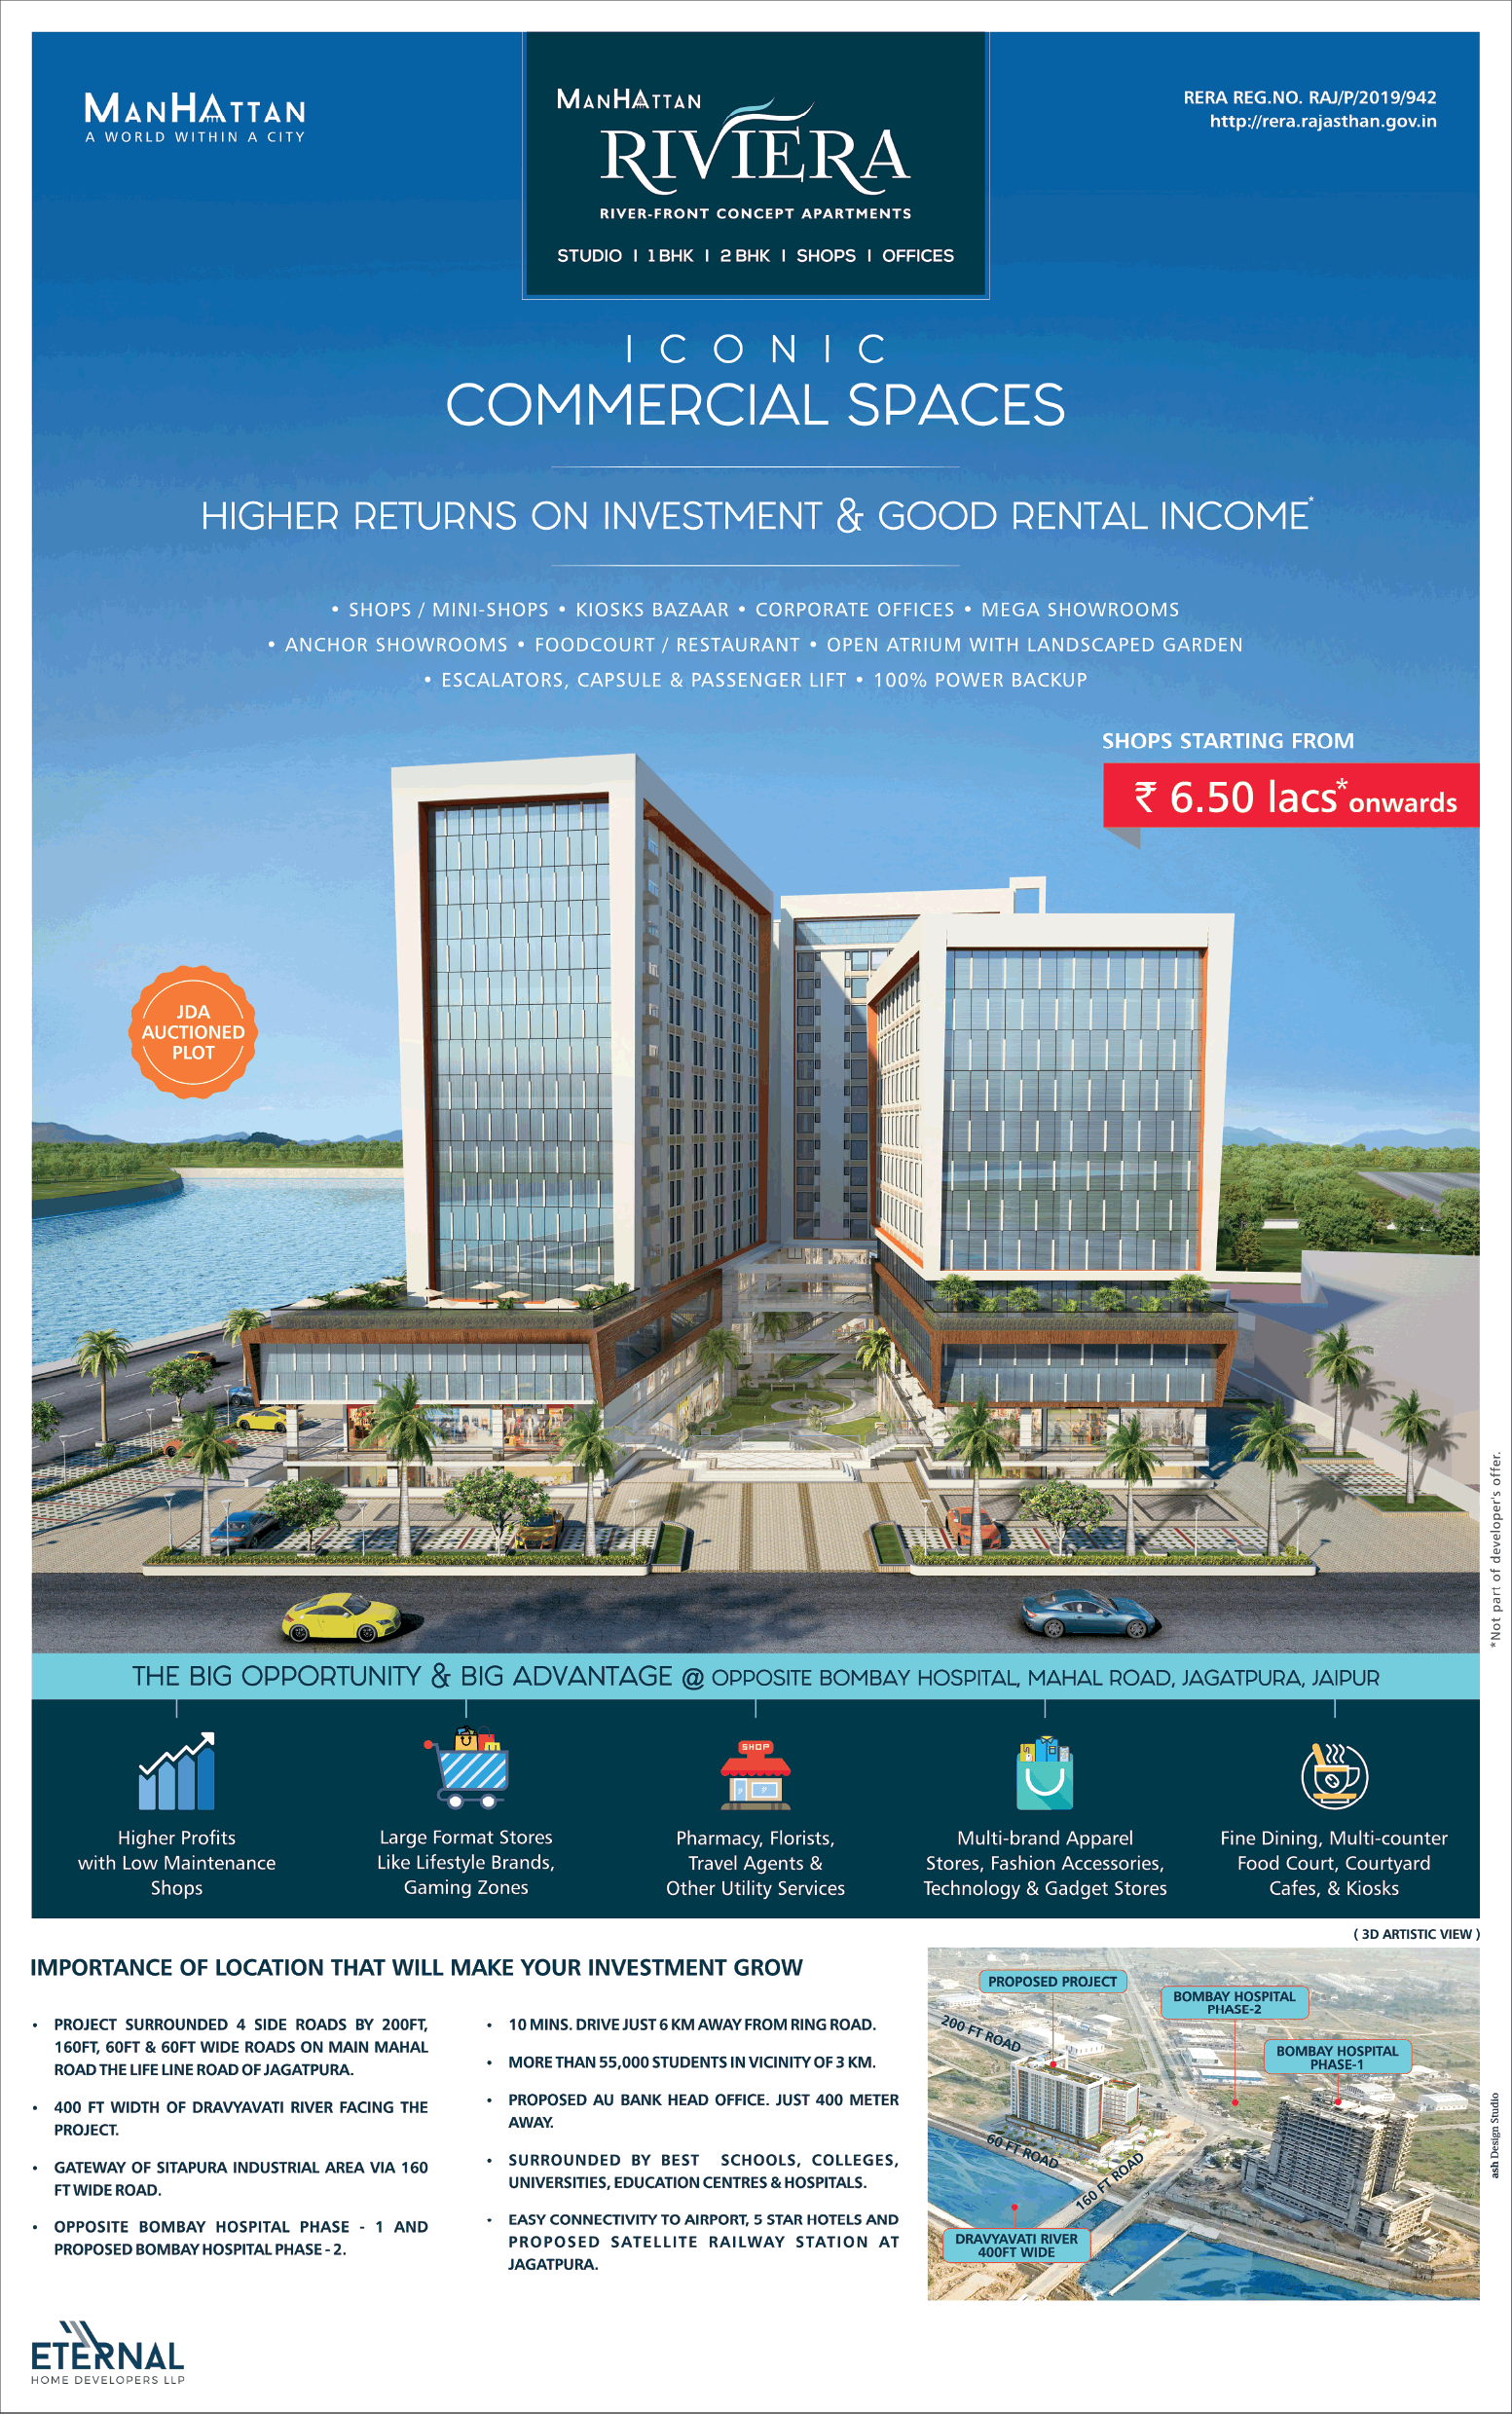 Avail higher returns on investments & good rental income at Manhattan Rivera in Jaipur Update